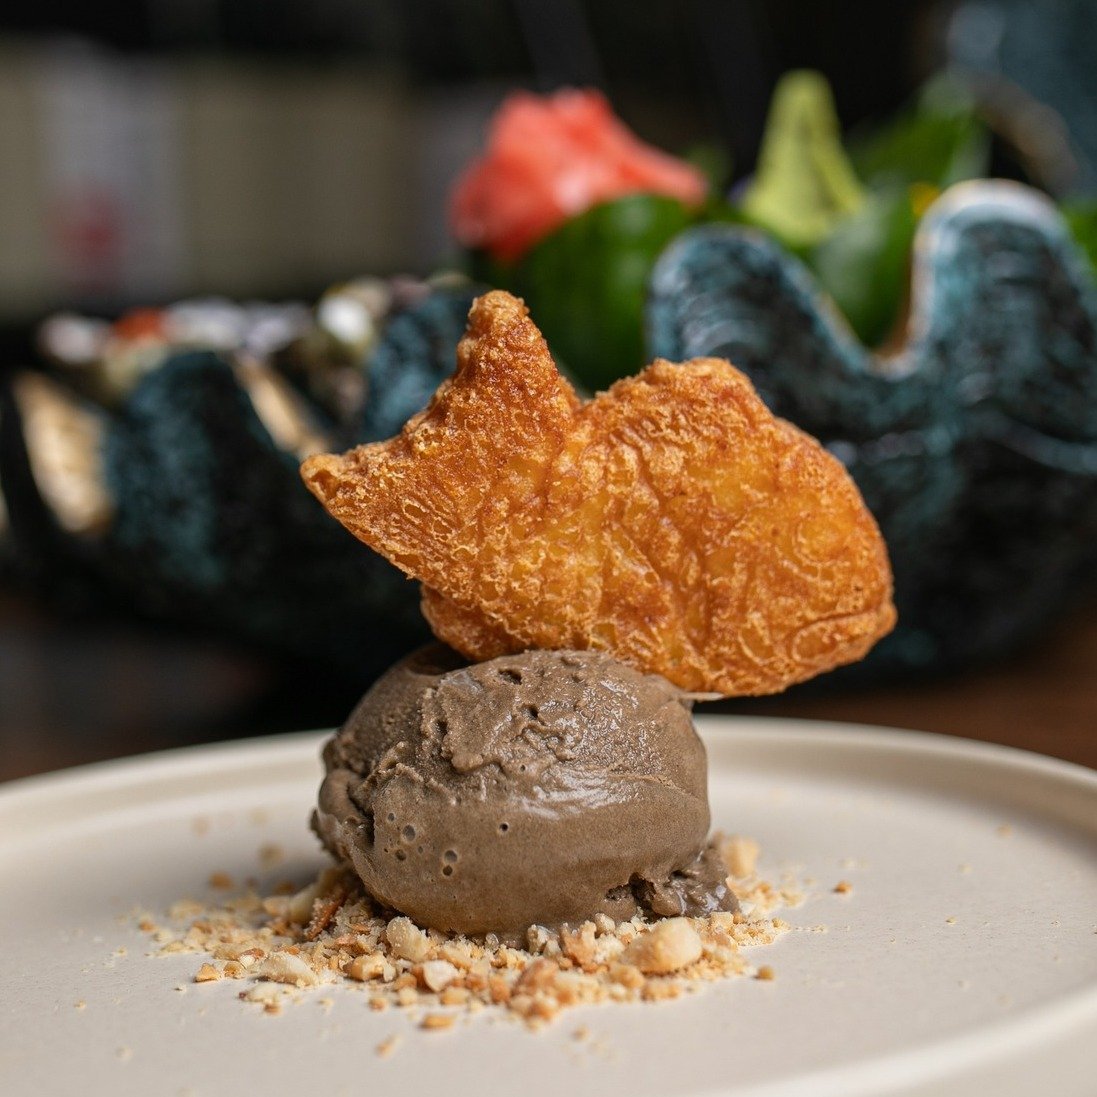 Sweeten up your day with our Custard Taiyaki! Delight in the adorable fish-shaped pancake filled with creamy custard, accompanied by a scoop of luscious black sesame ice cream. 

#ChopChop #Canberra #Restaurant